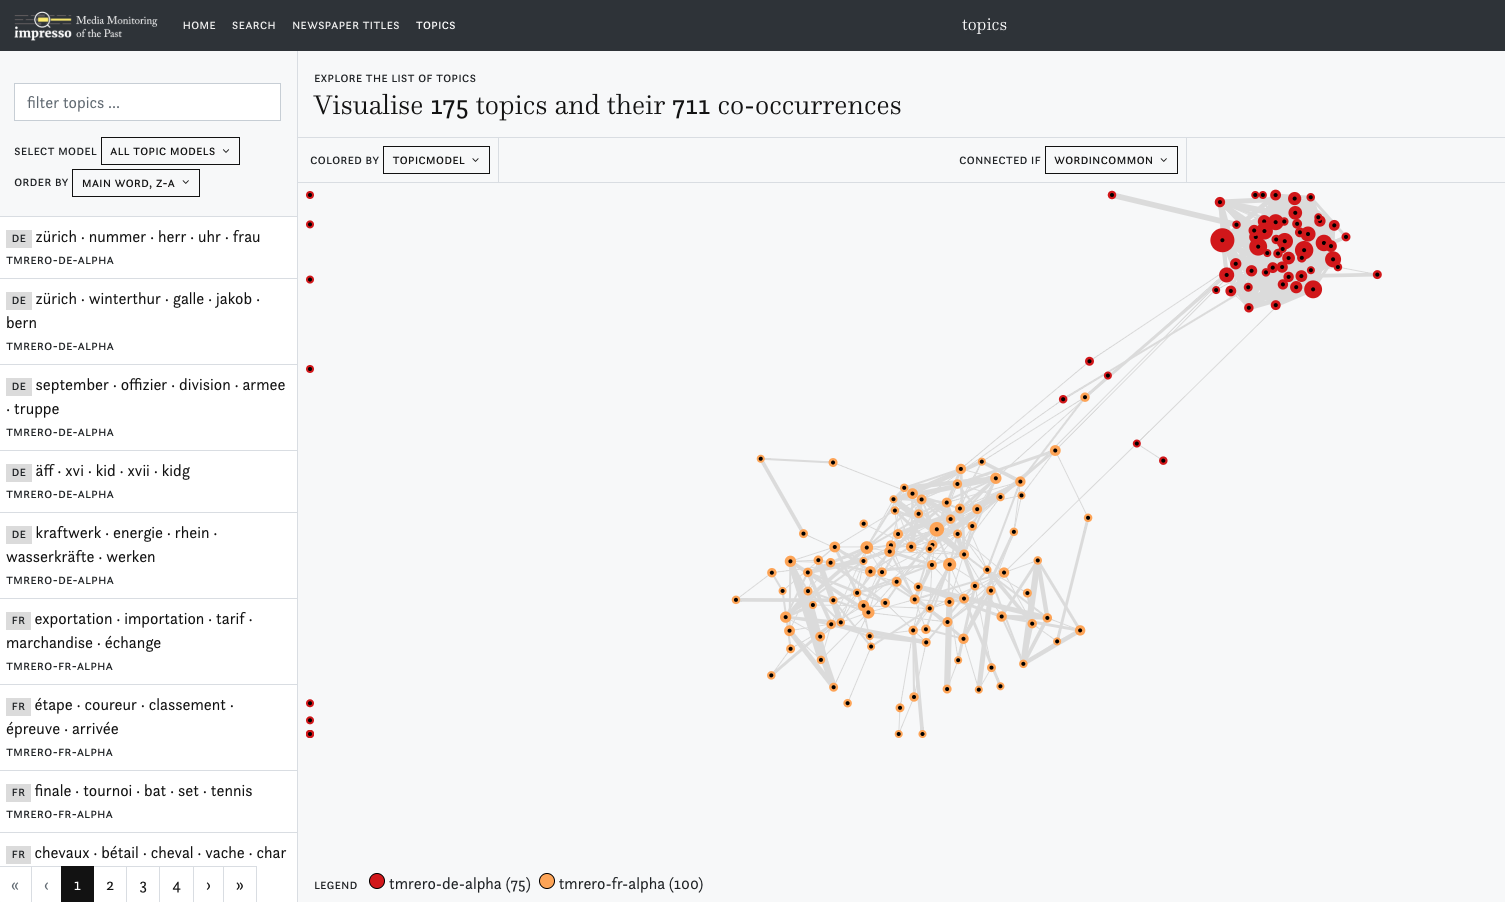 Visualisation of the topics from the French (orange) and German (red) collections